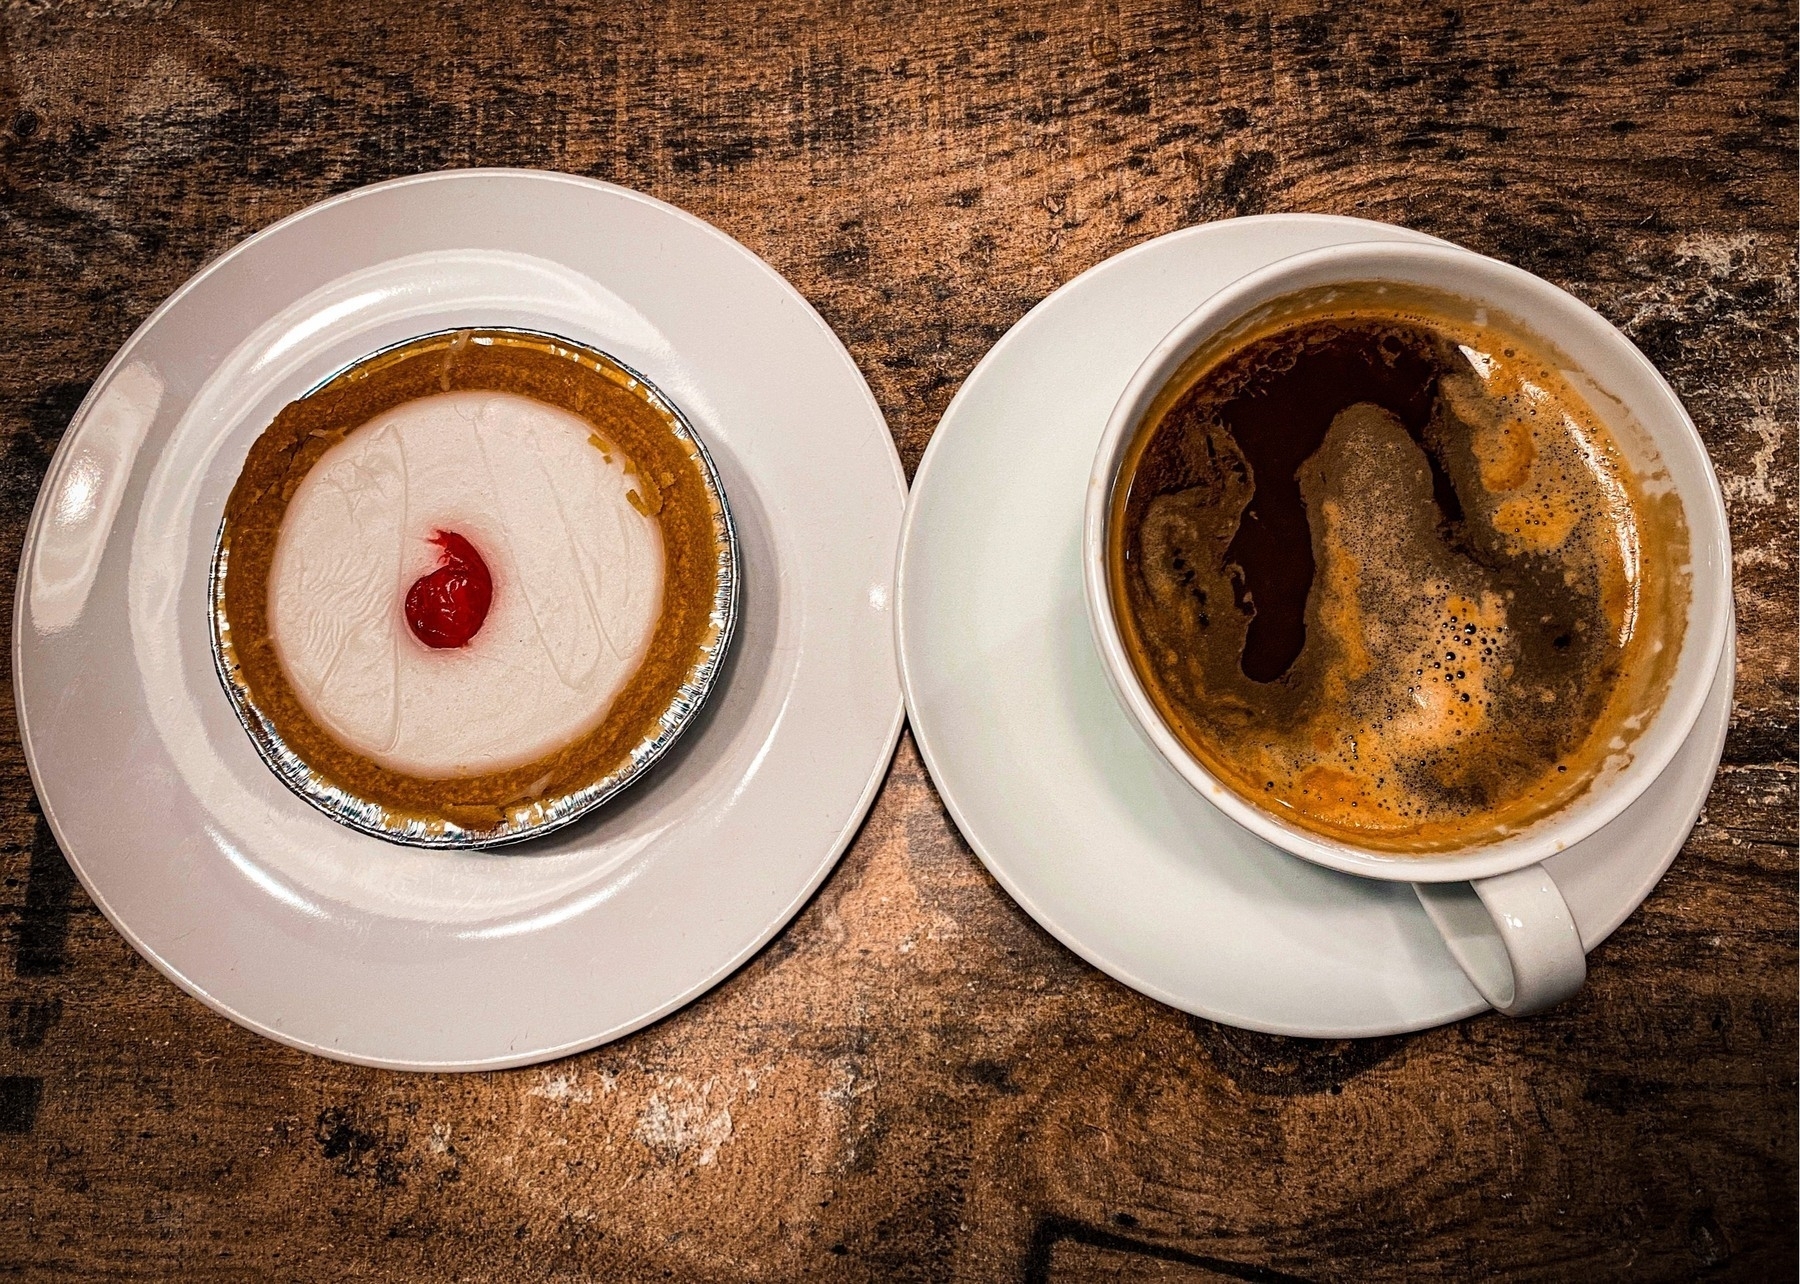 Top down view of an Americano and a cherry bakewell on a wooden table